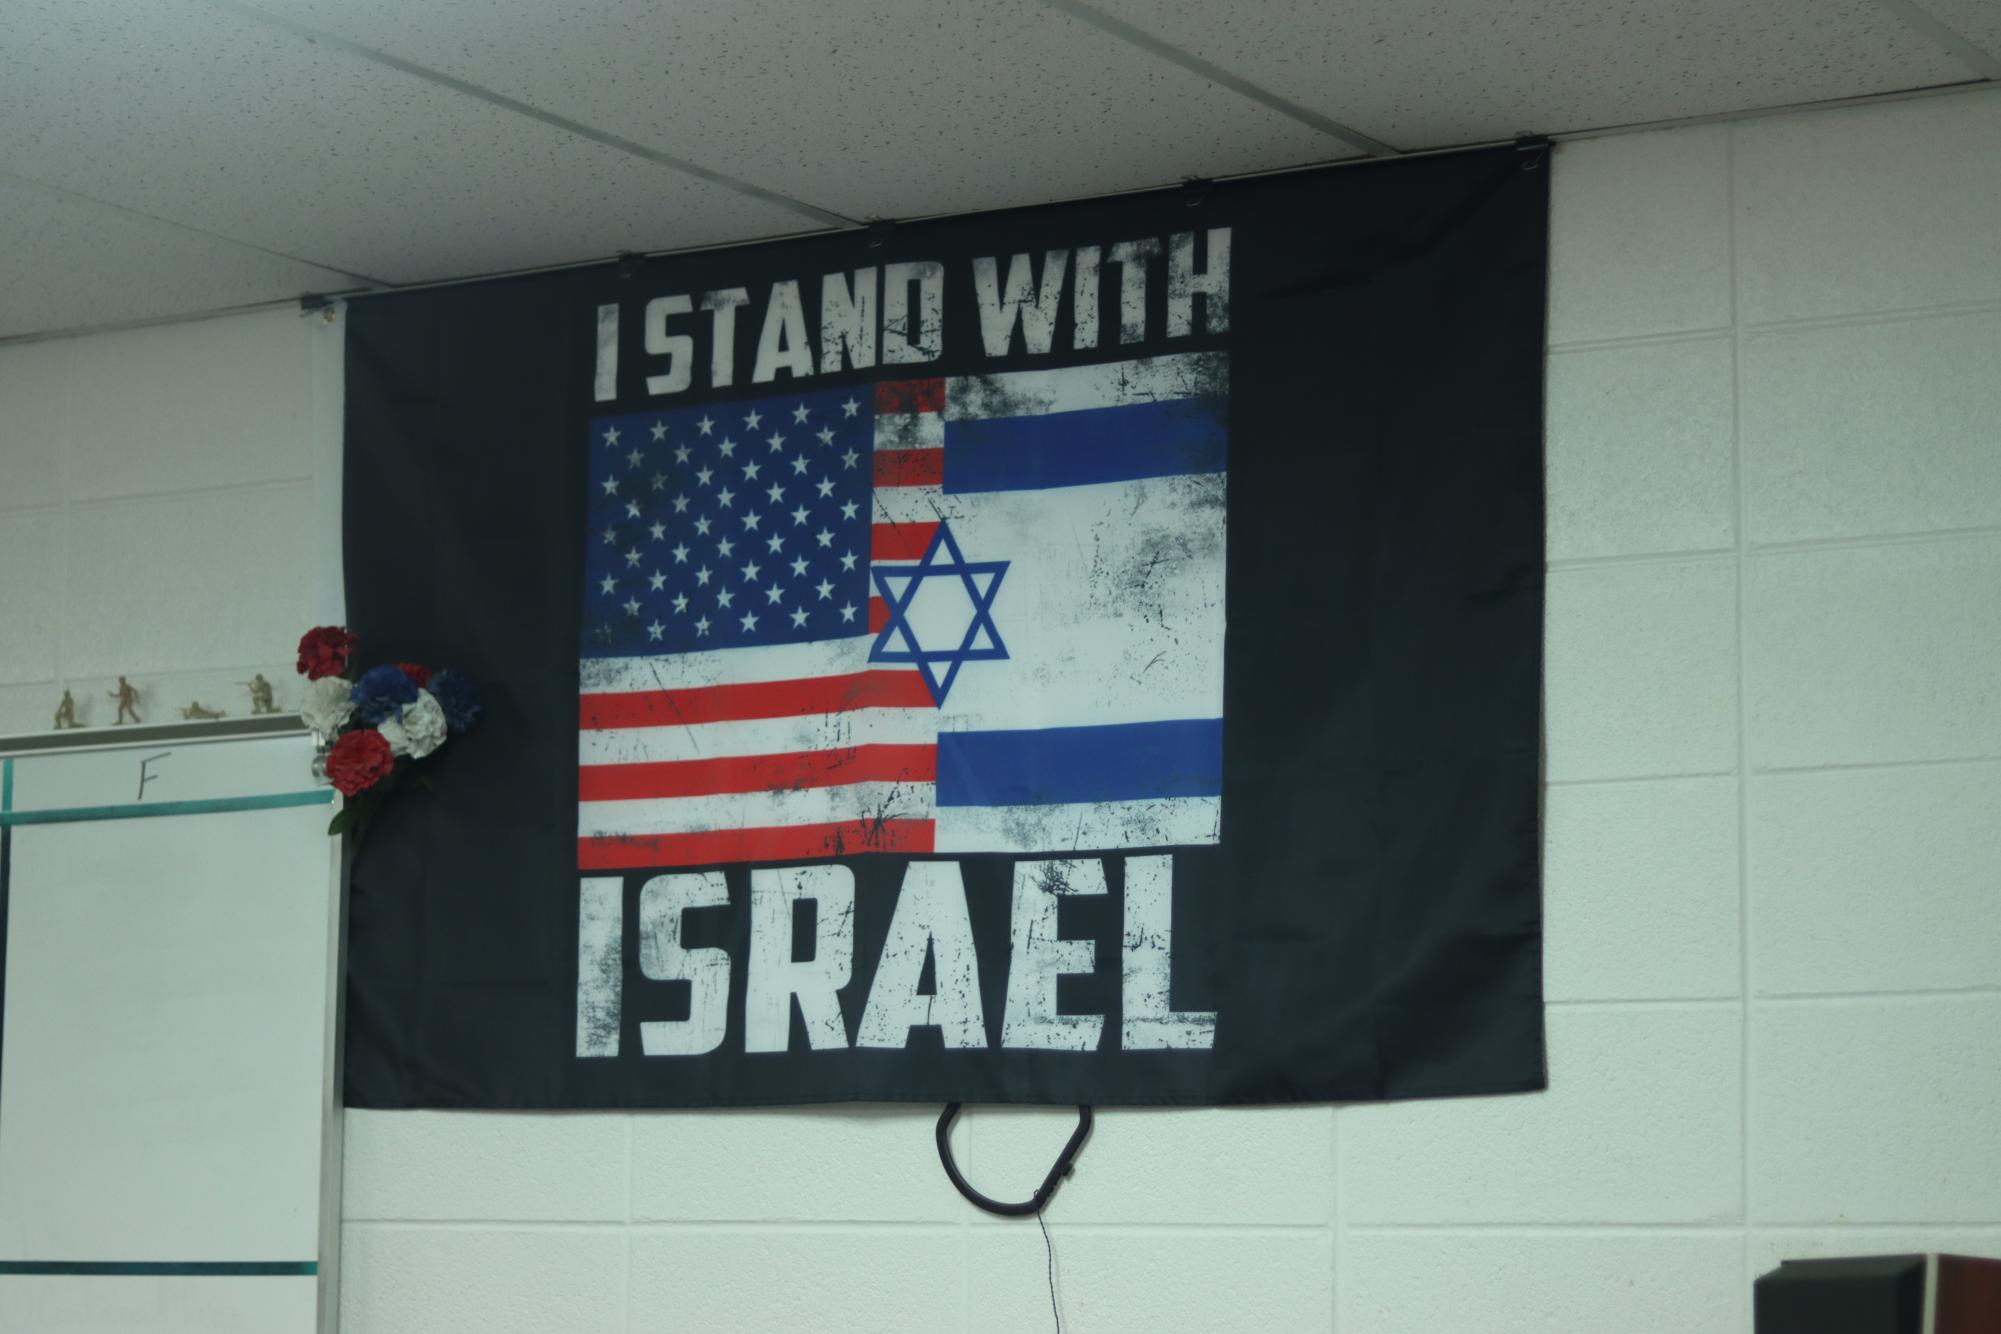 An American and Israel flag hangs up in Shaltry’s room. The teacher has been vocal in his support for Israel over the past few months.